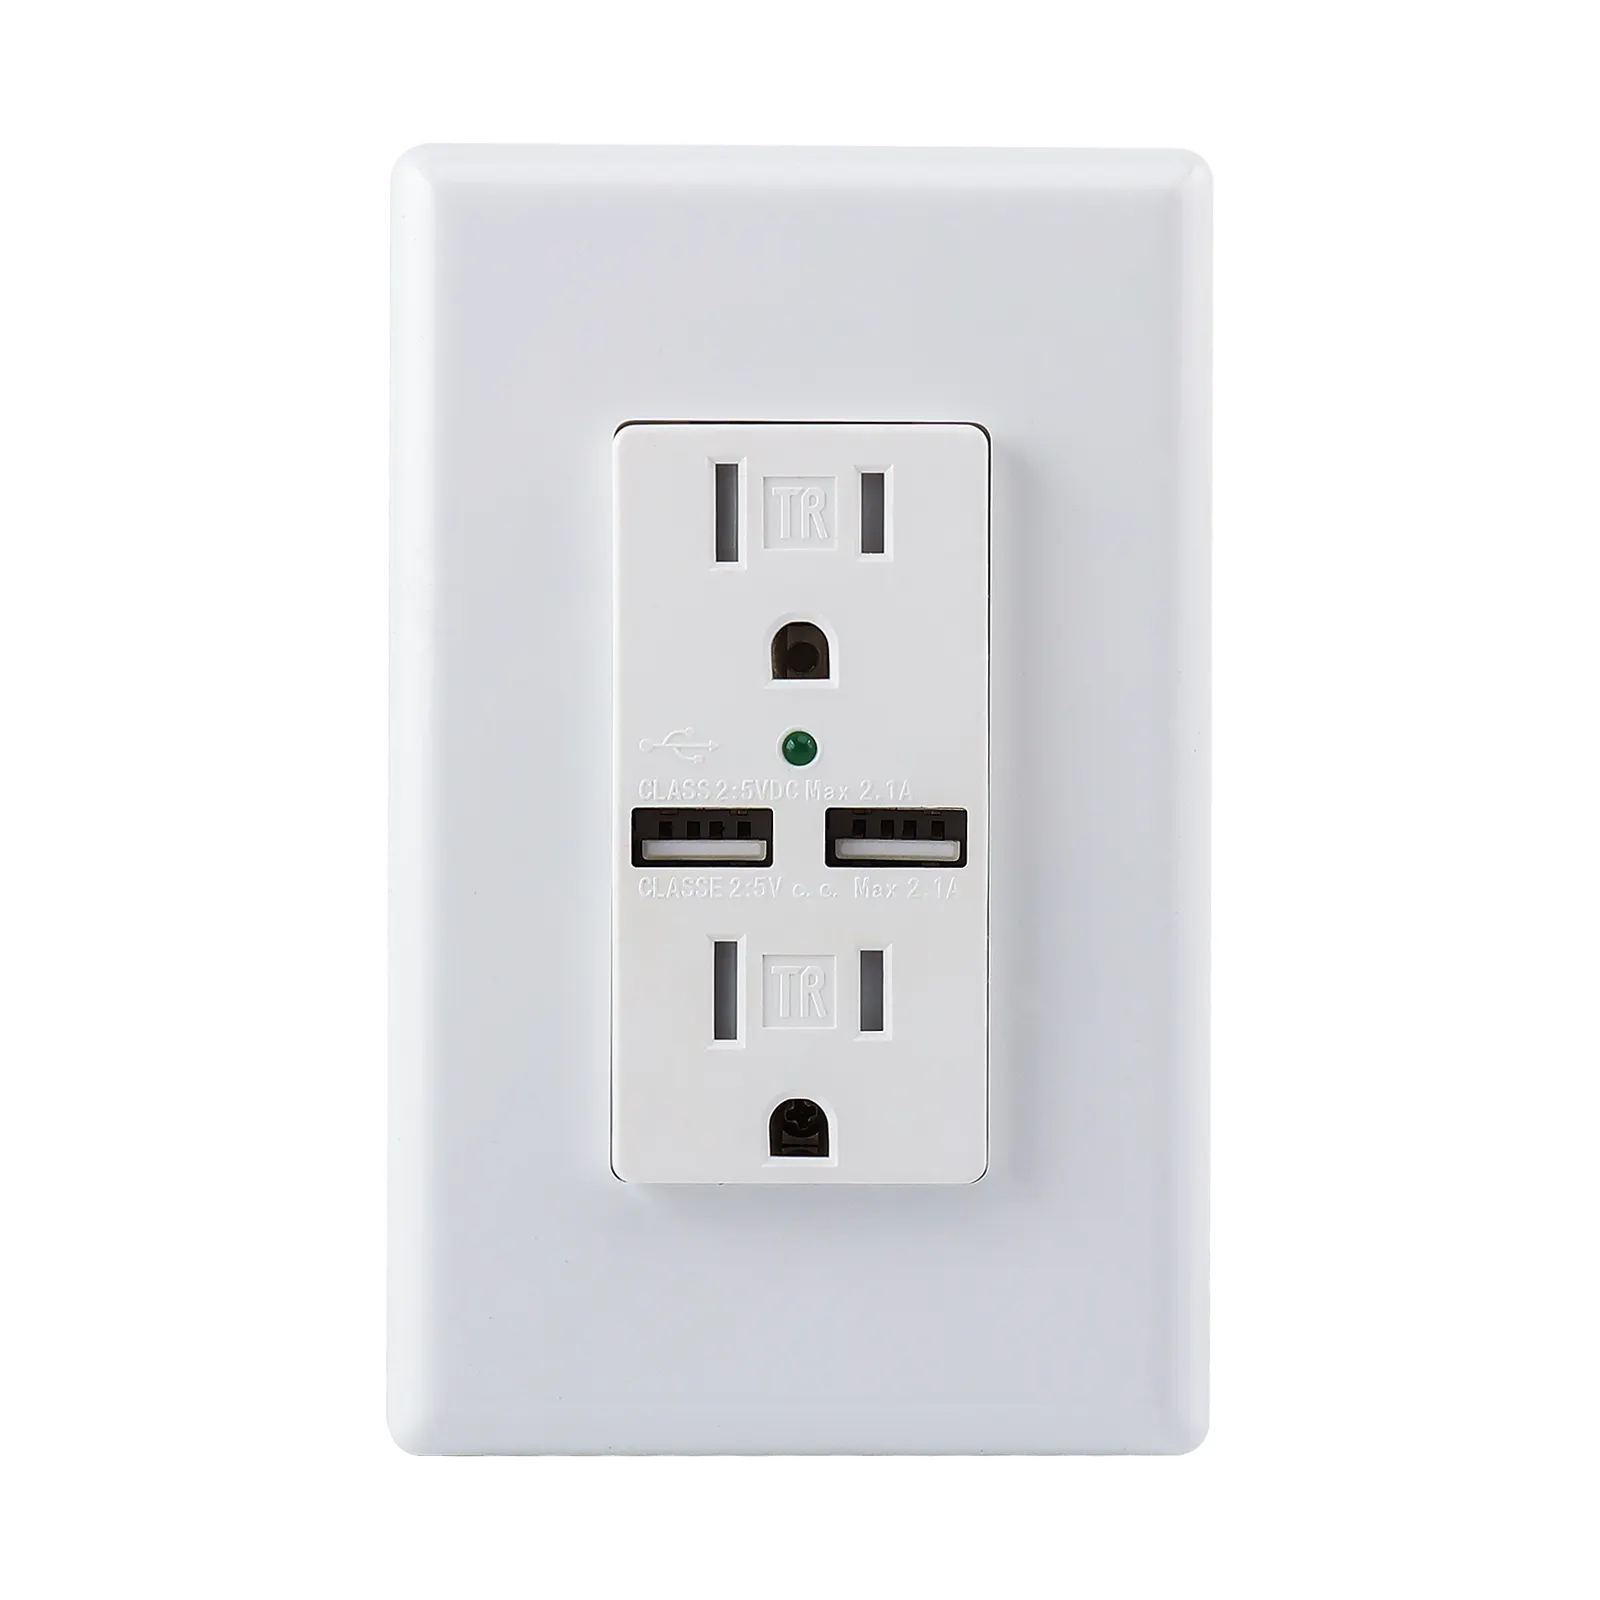 Usb wall outlet 2.1A USB Wall Outlet Charger Upgraded 15 Amp Tamper Resistant Duplex Receptacle with USB Ports and LED Indicator